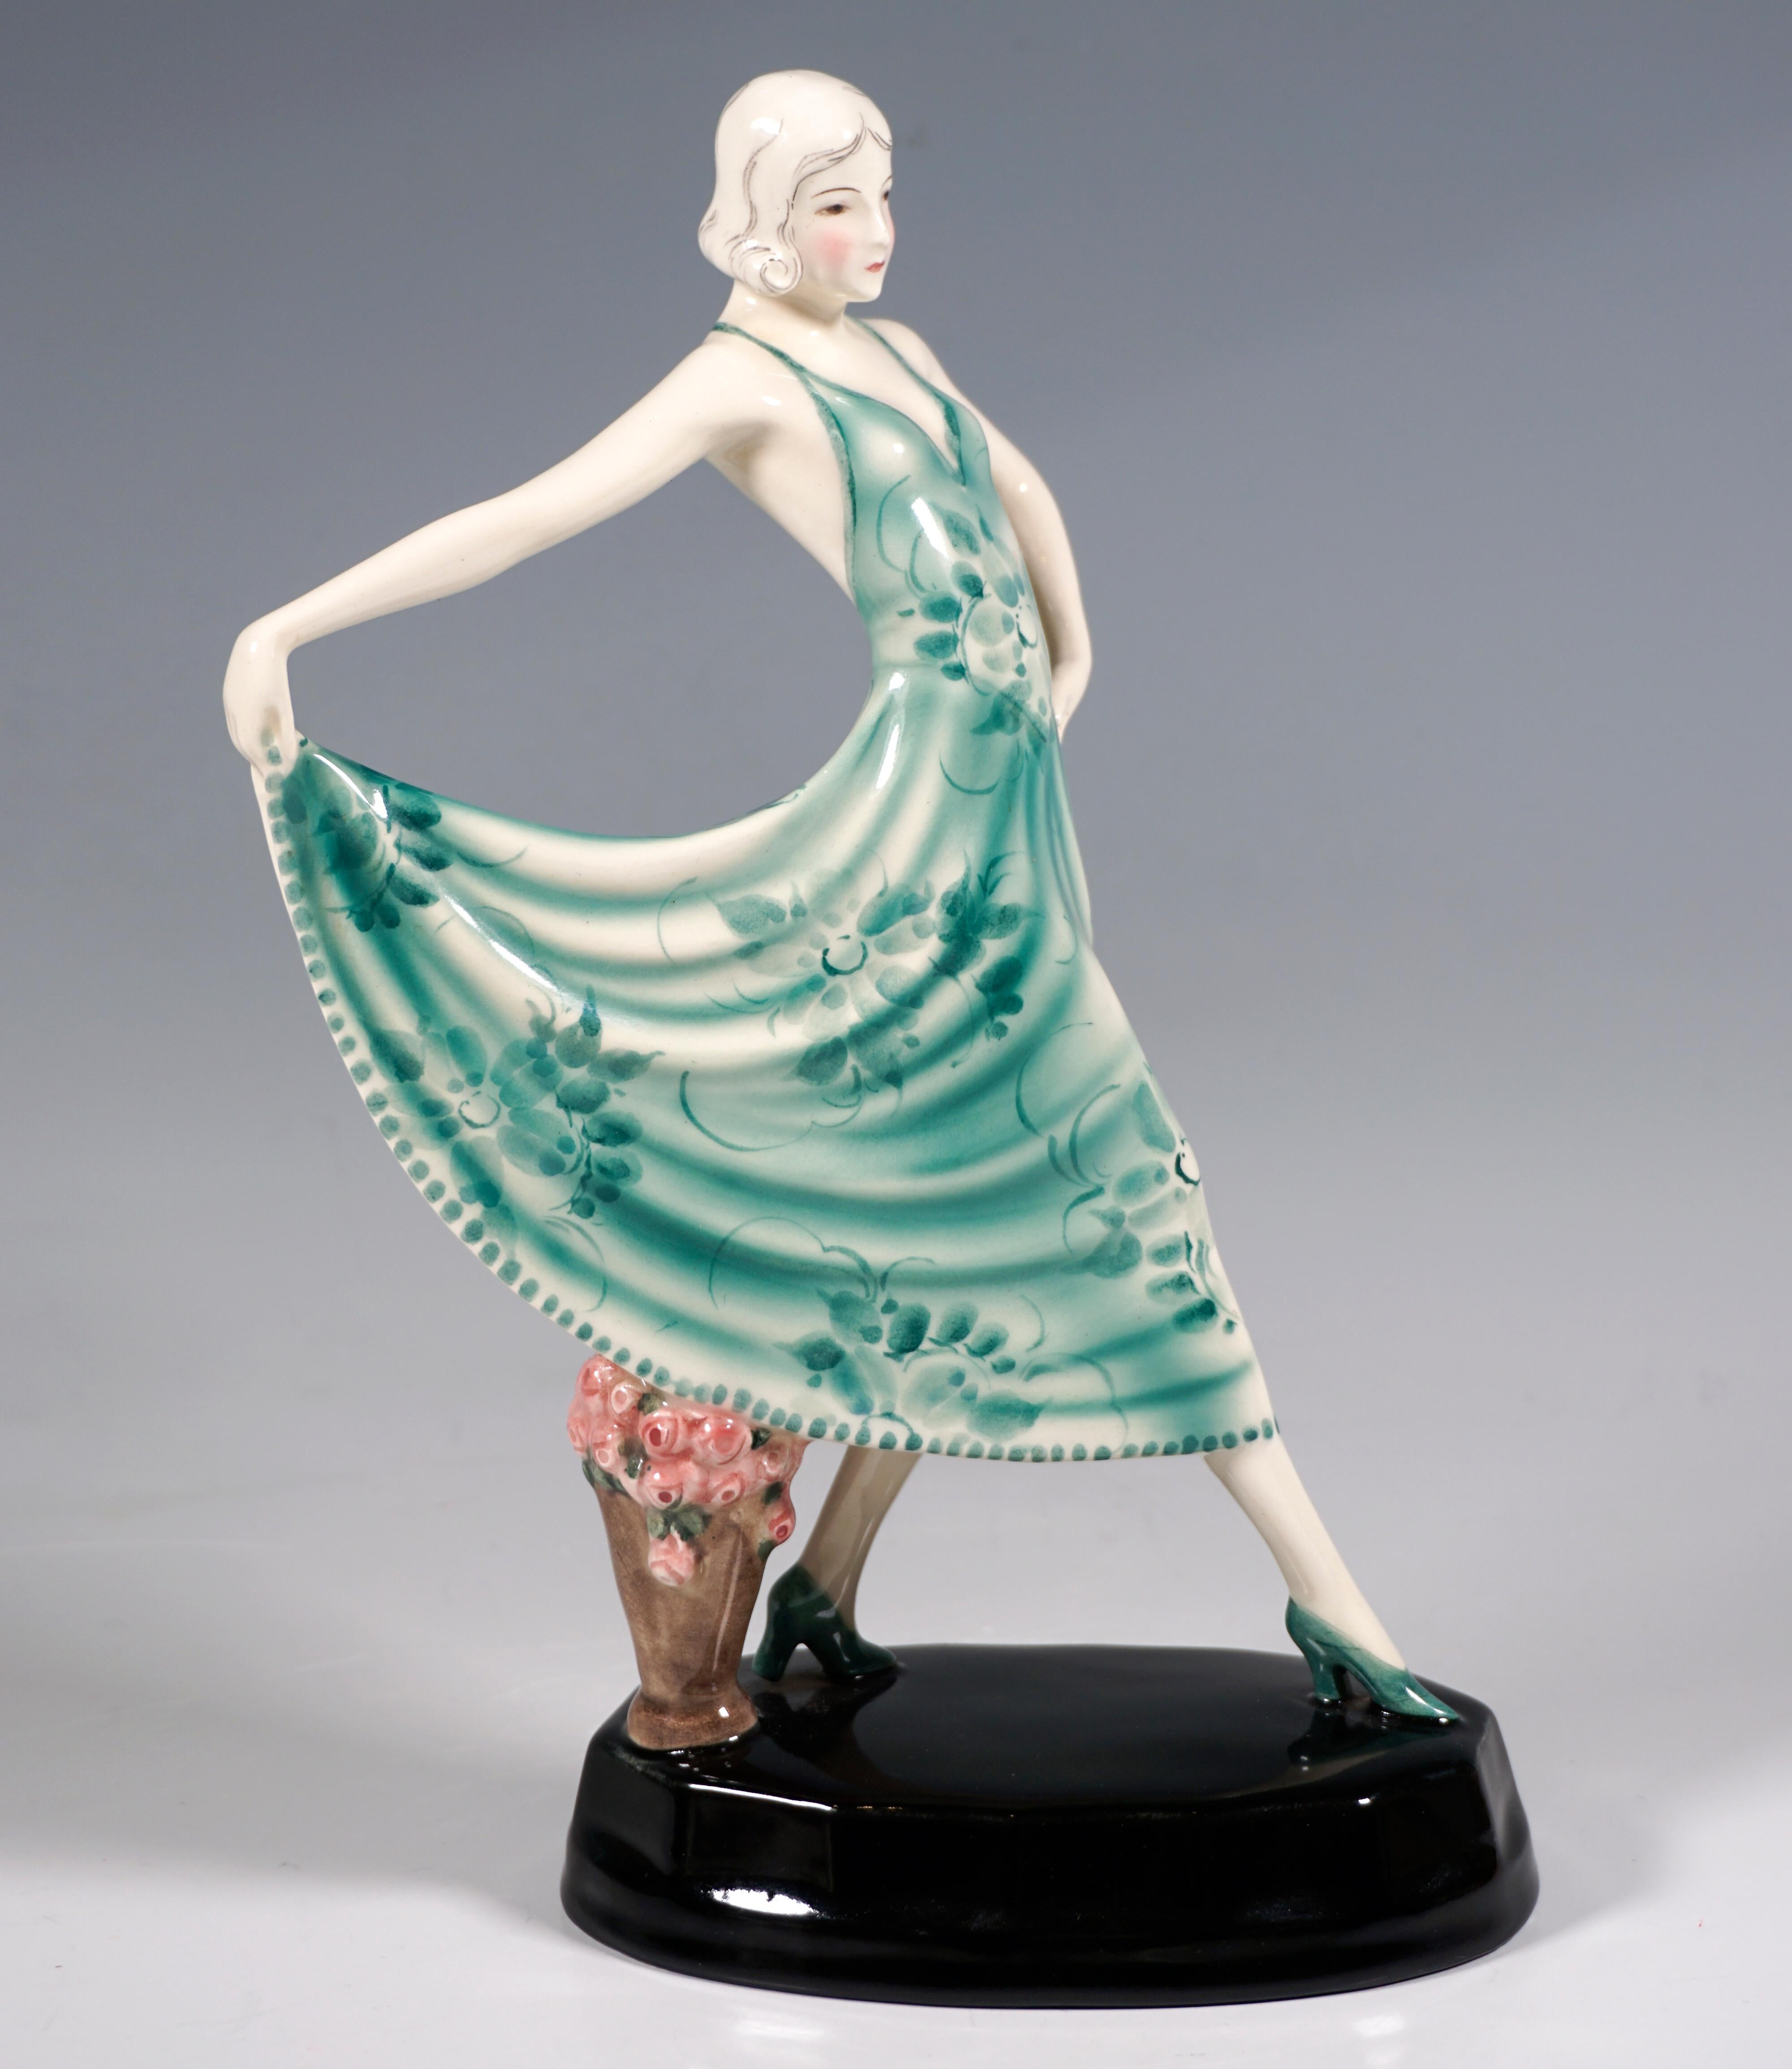 Delicate Goldscheider Art Ceramics Figurine of The 1920s:
Actress Lilian Harvey with chin-length, light hair as a striding dancer, holding up the hem of her low-cut, green strappy dress with floral decoration with her right hand stretched straight